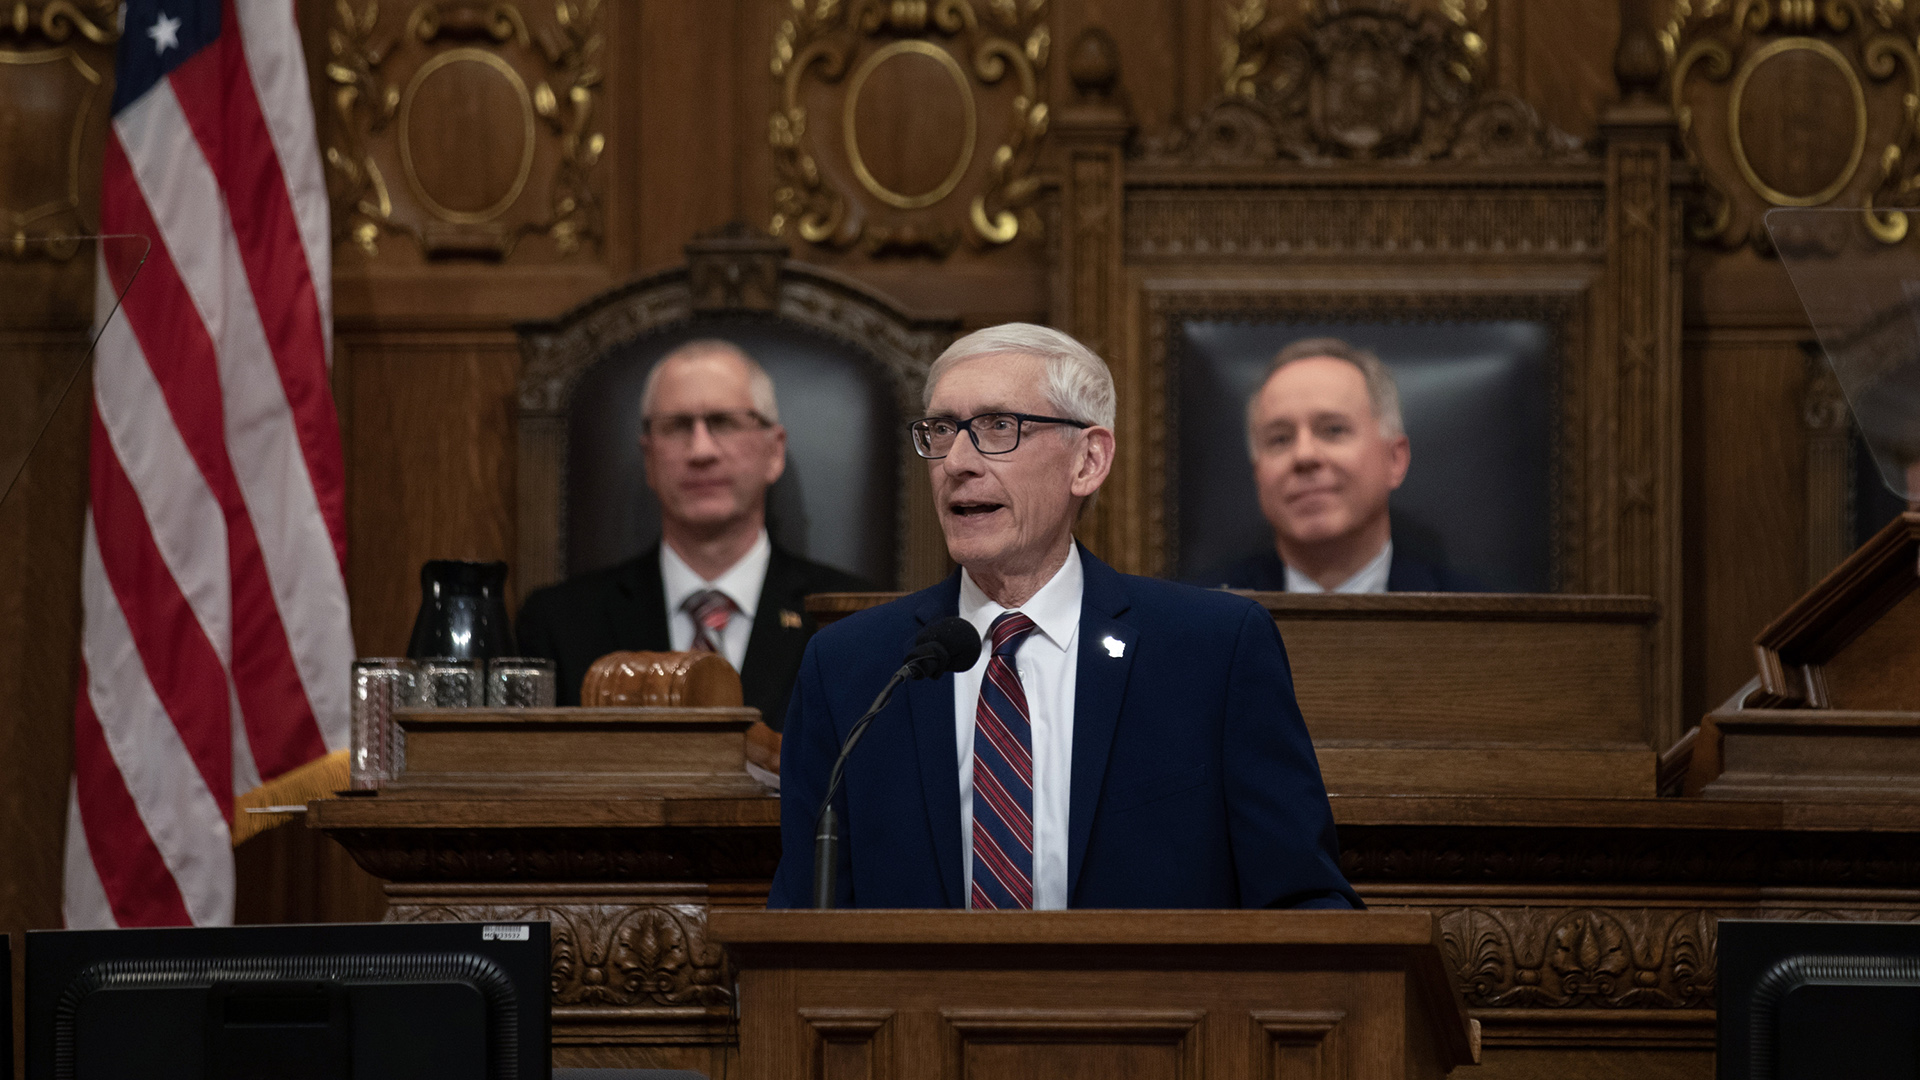 Tony Evers speaks into a microphone while standing behind a wood podium in front of a legislative dais with two people seated in high-backed wood and leather chairs, with a U.S. flag to his right, the backs of two monitors in the foreground, and carved wood wall paneling in the background.